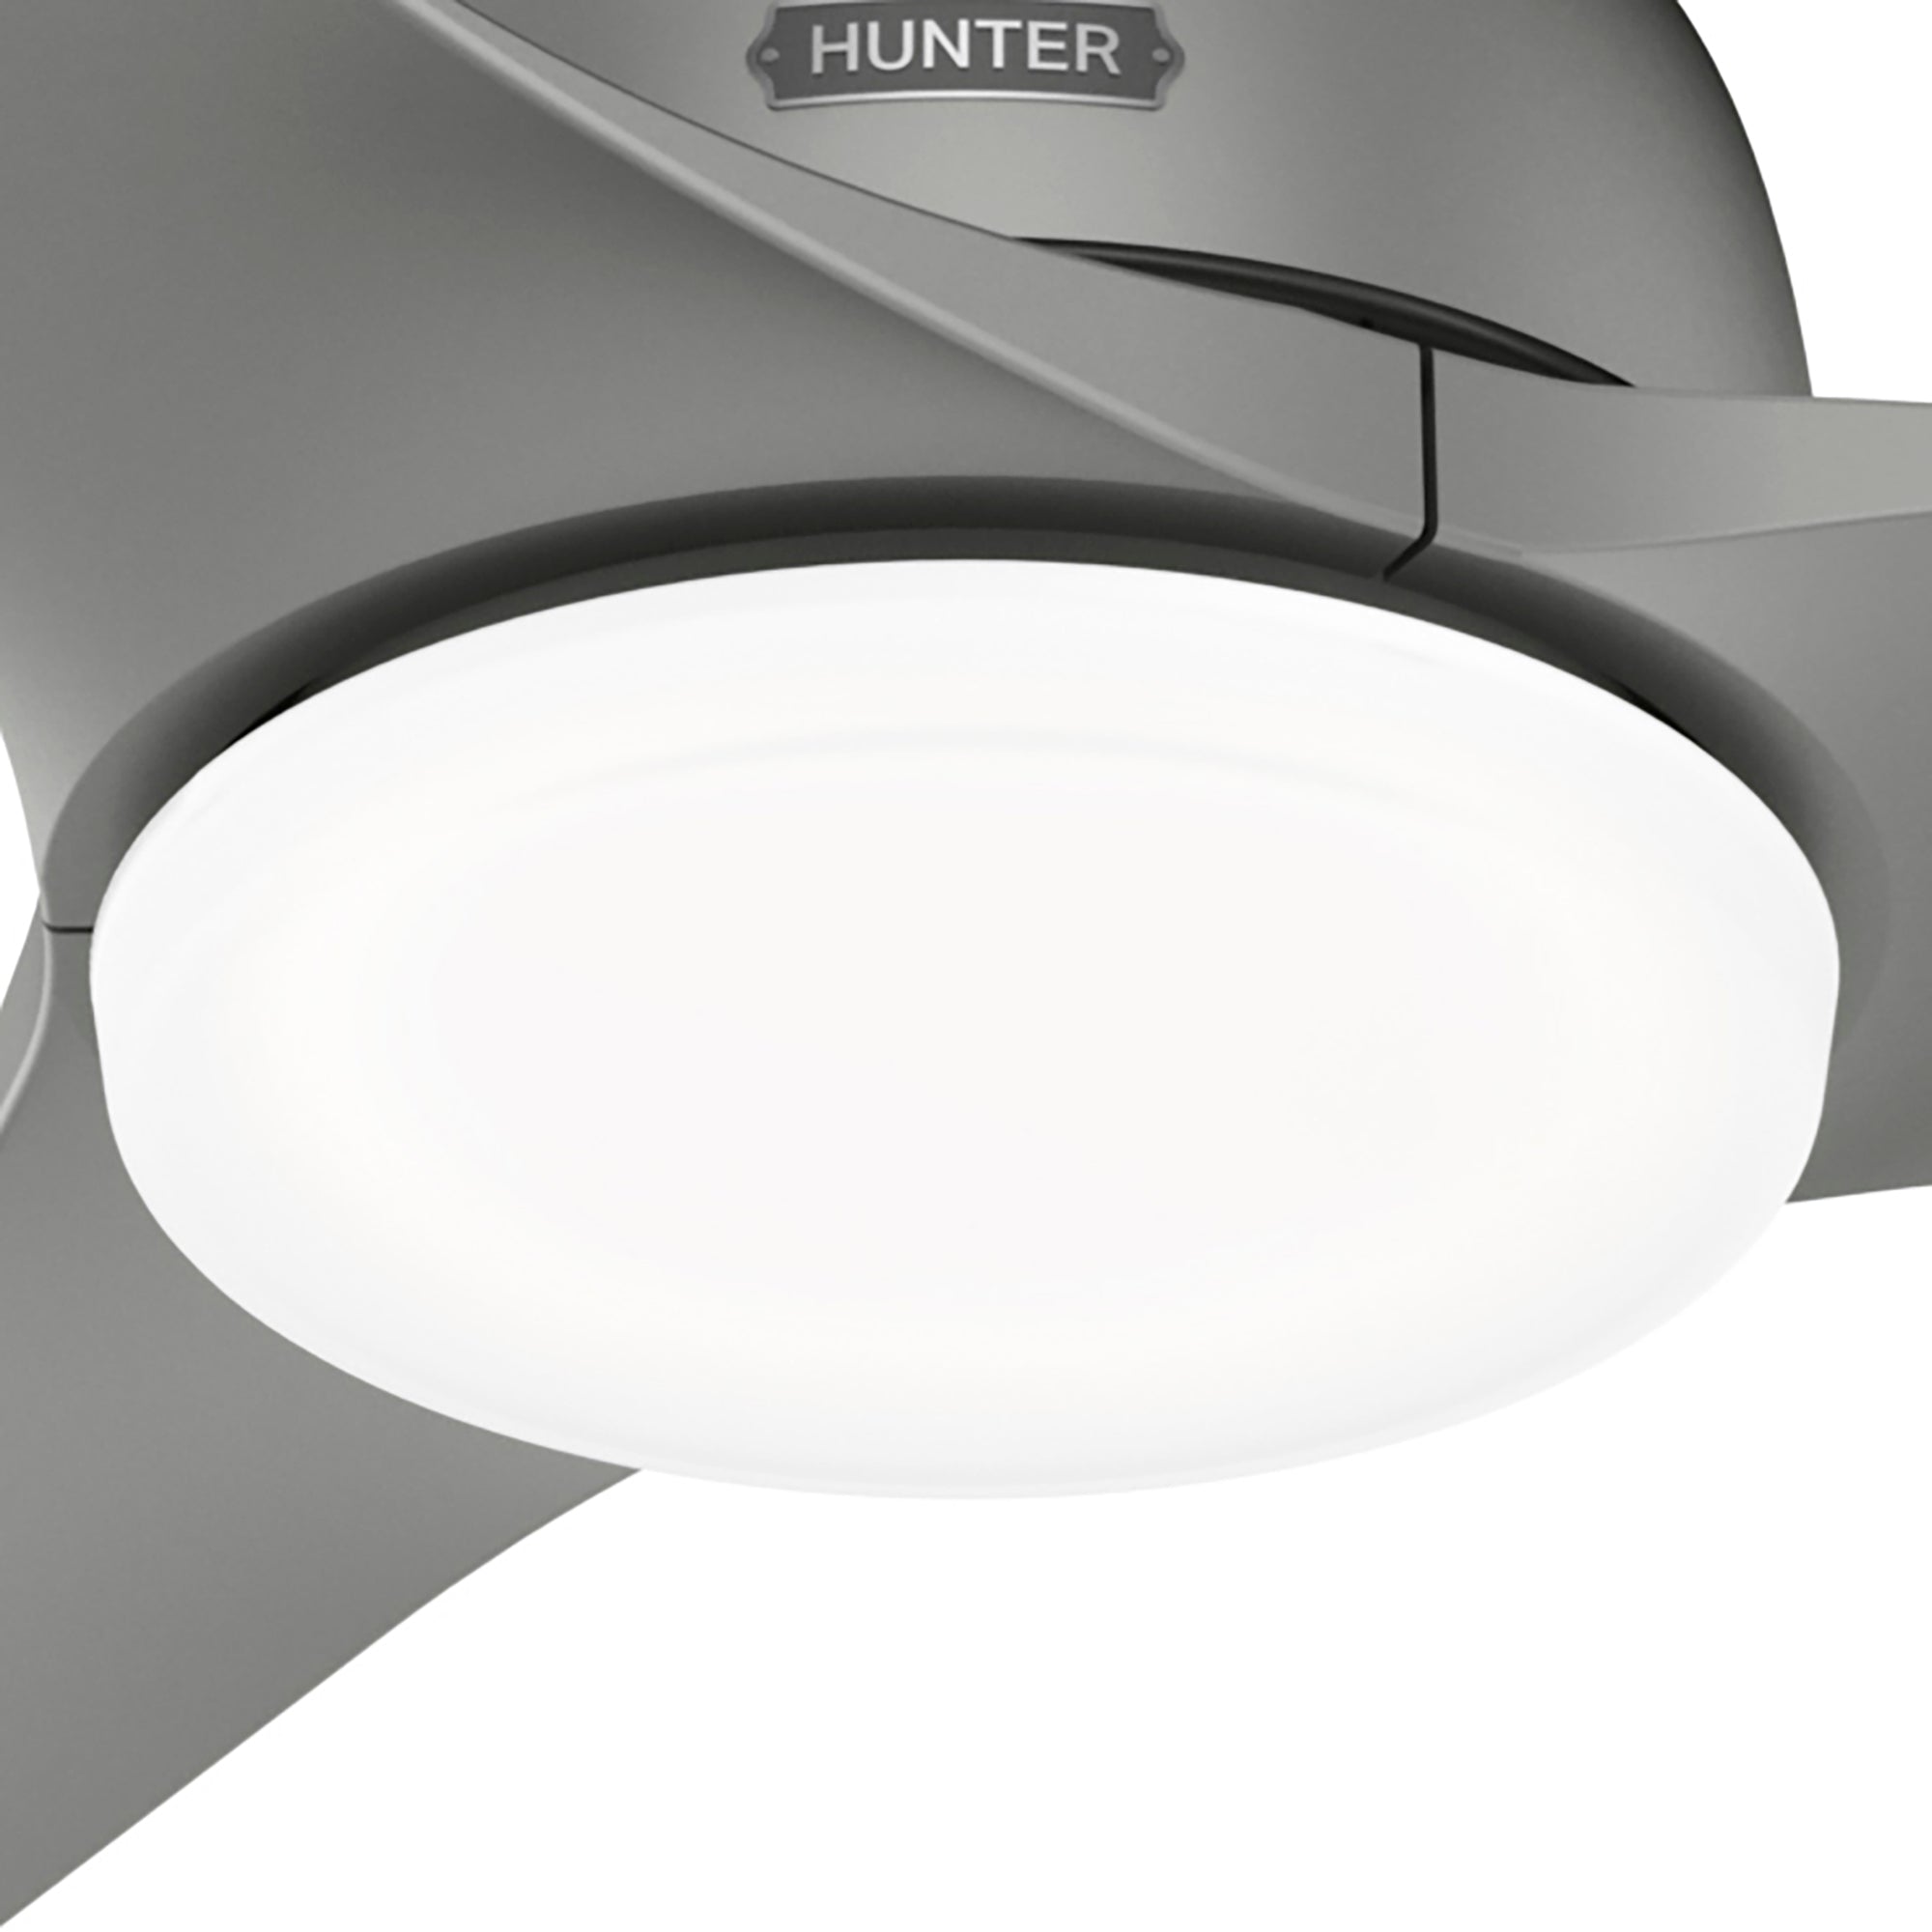 Hunter 52 inch Gallegos Damp Rated Ceiling Fan and Wall Control Ceiling Fan Hunter Matte Silver Matte Silver / Matte Silver Painted Cased White